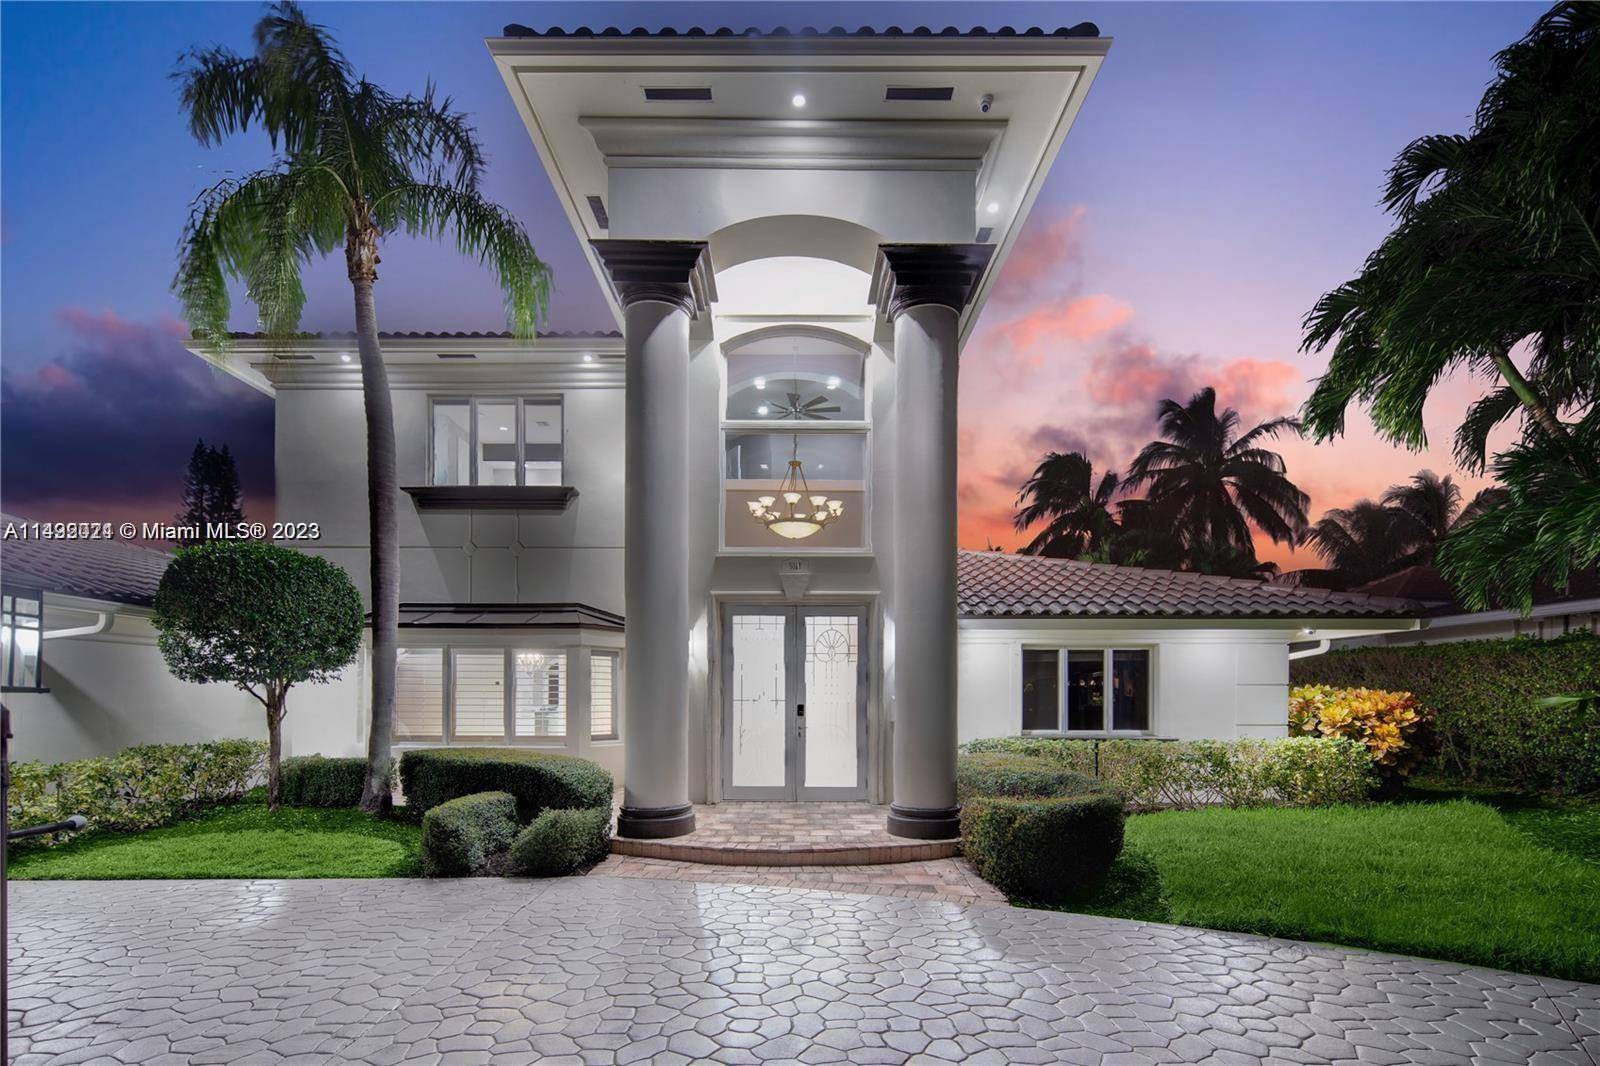 Welcome to 5111 NE 30th Ave, a gem in the heart of Lighthouse Point, FL.